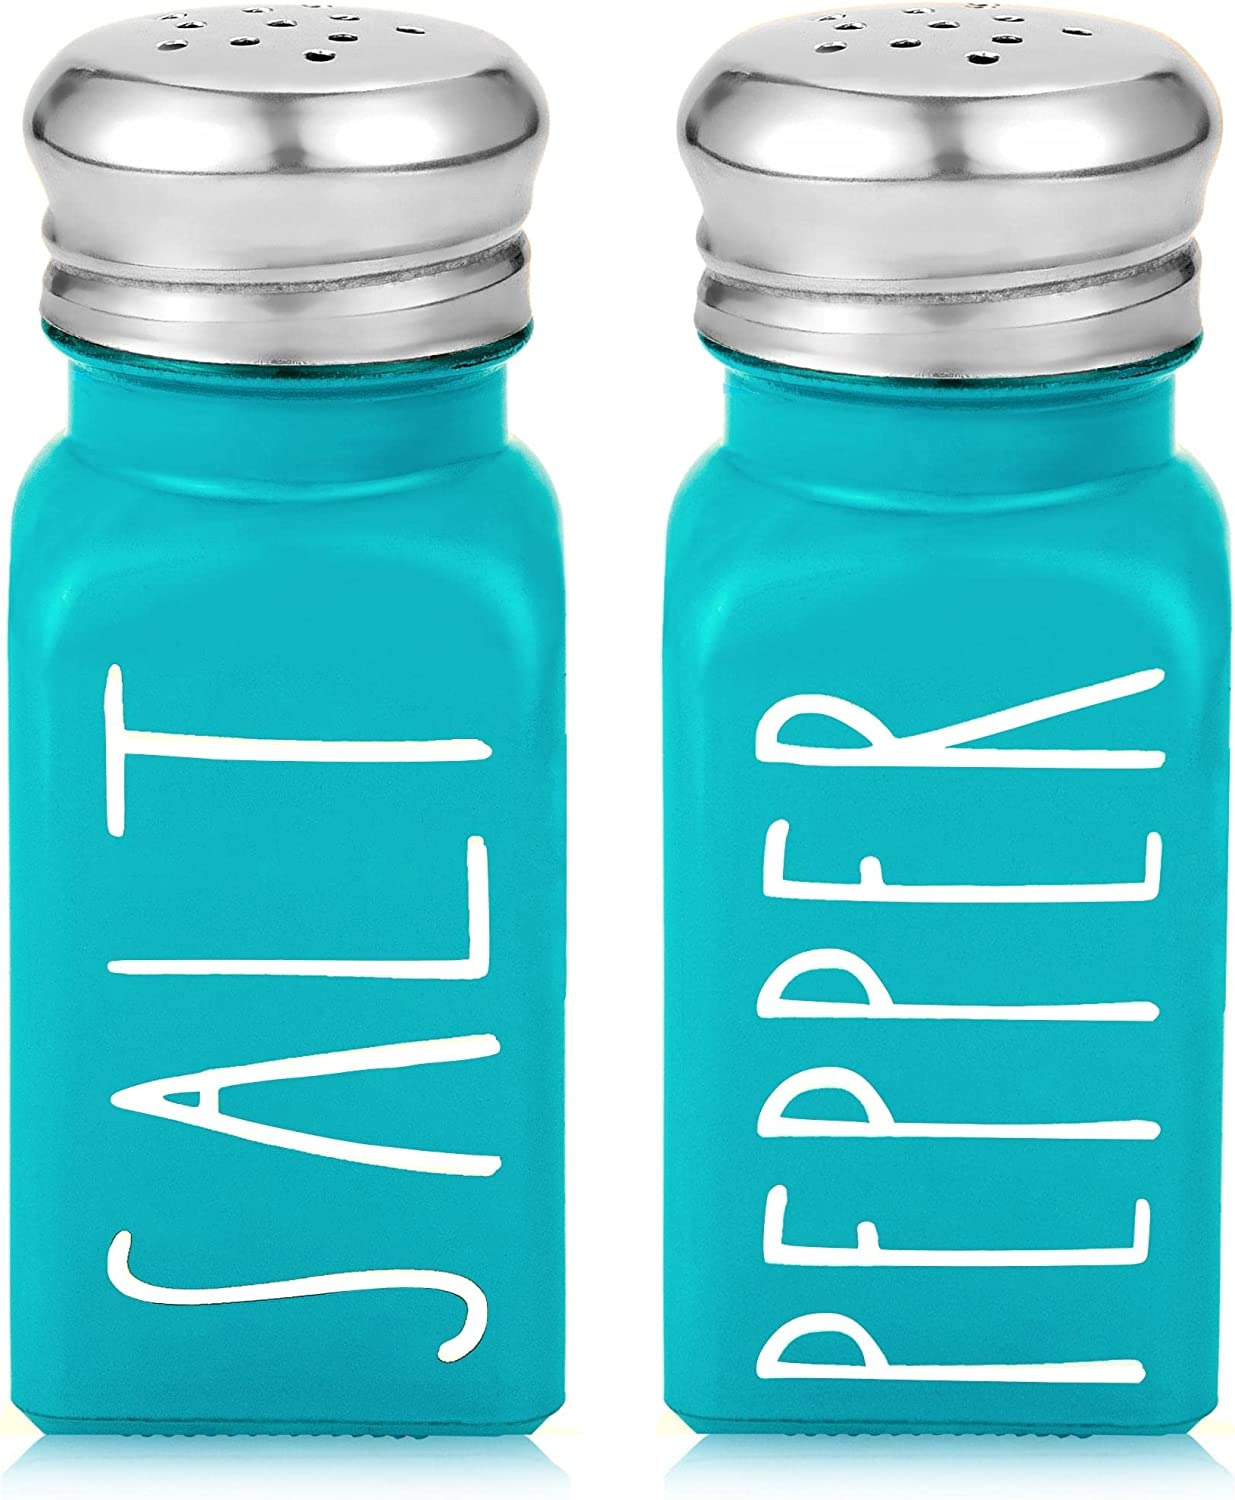 Teal Salt and Pepper Shakers Set Turquoise Kitchen Accessories Blue Color